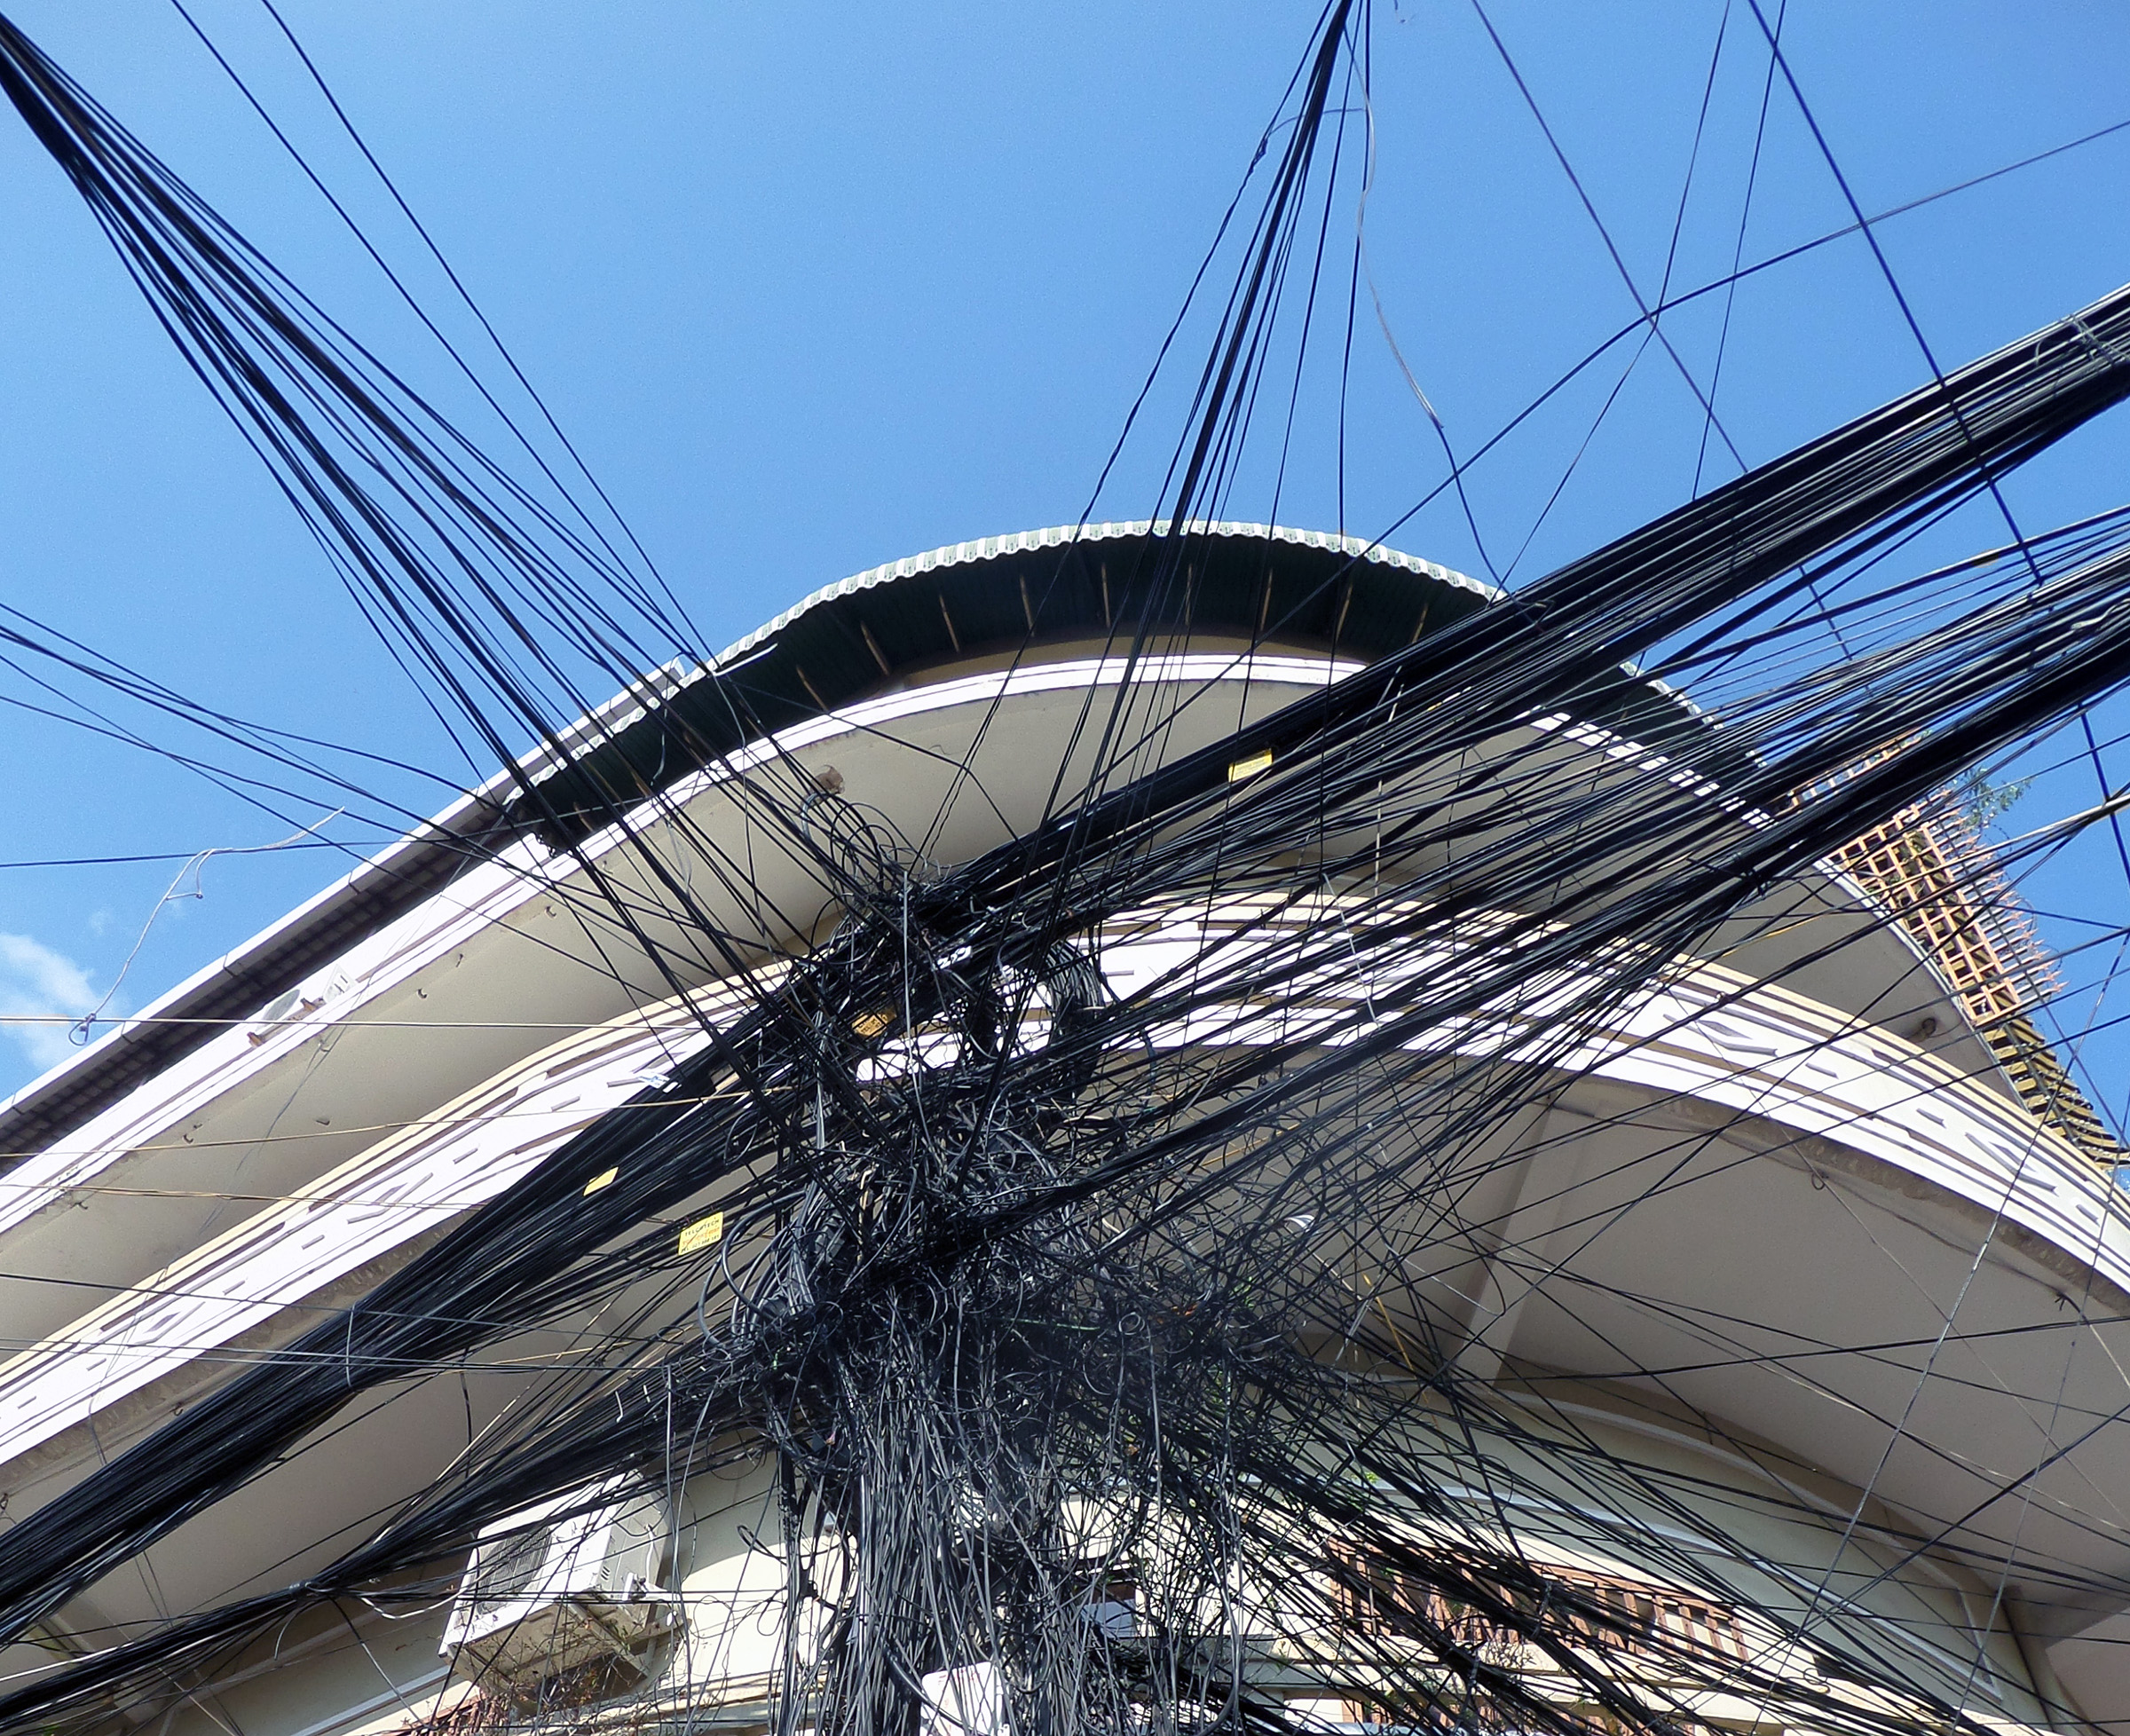 Chaotic cambodian street cabling photo